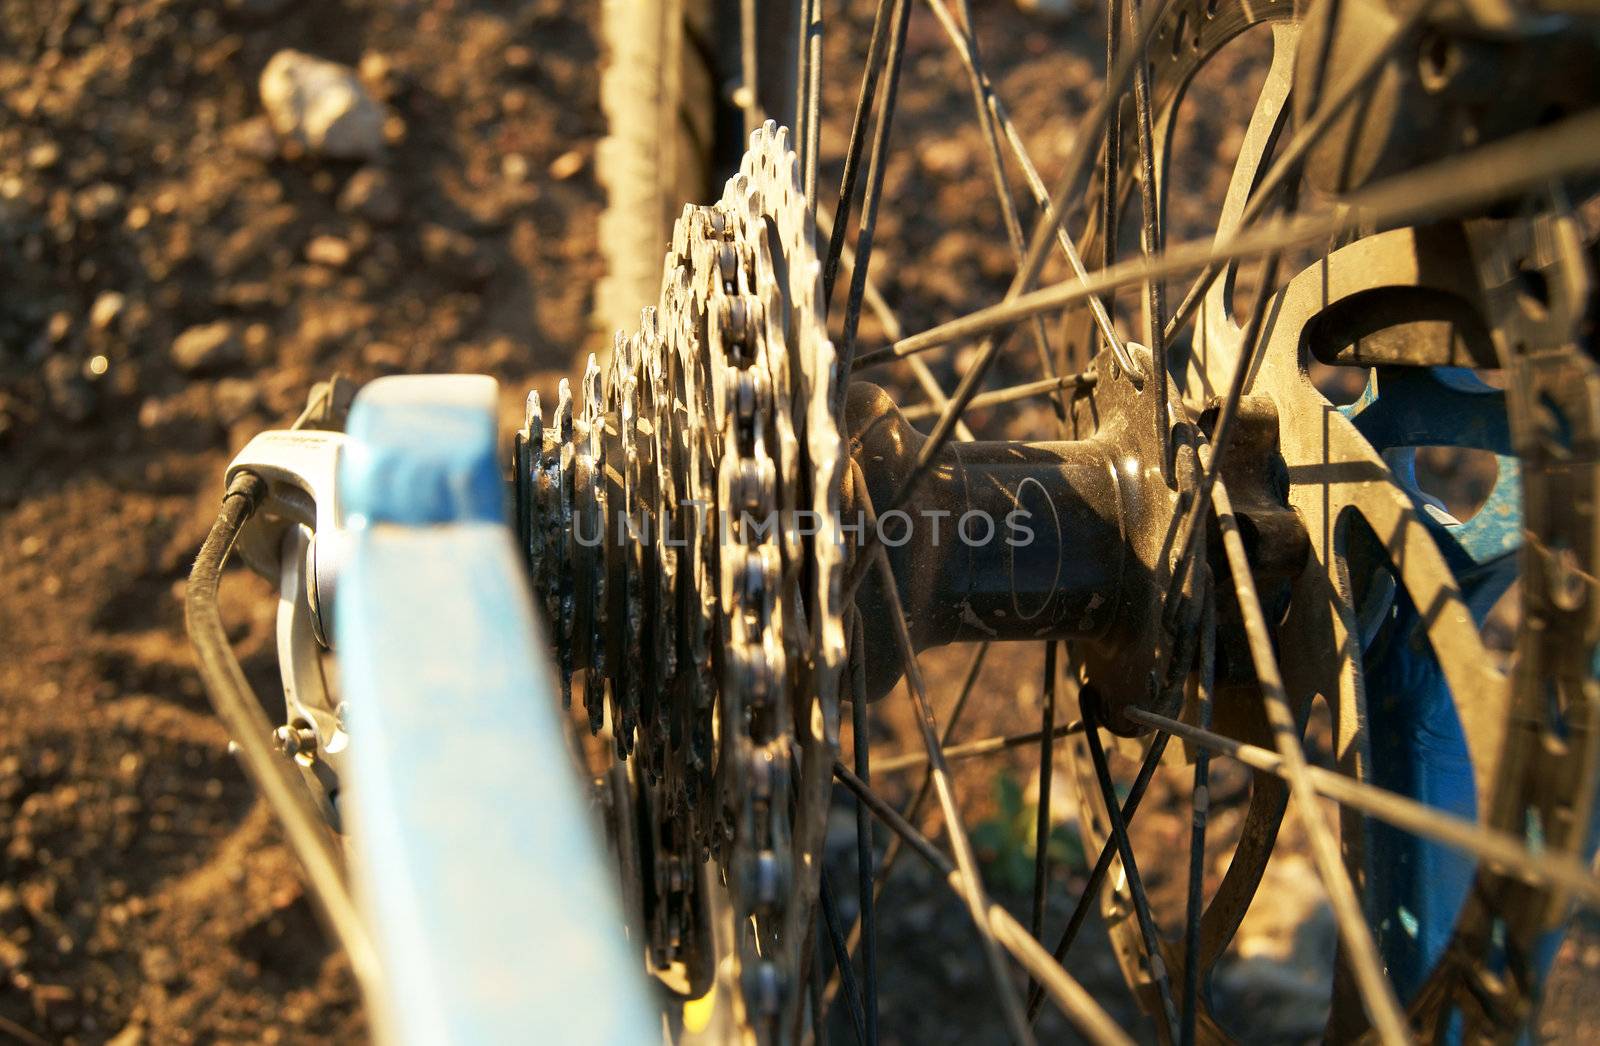 Closeup of a bicycle gear mechanism on the rear wheel